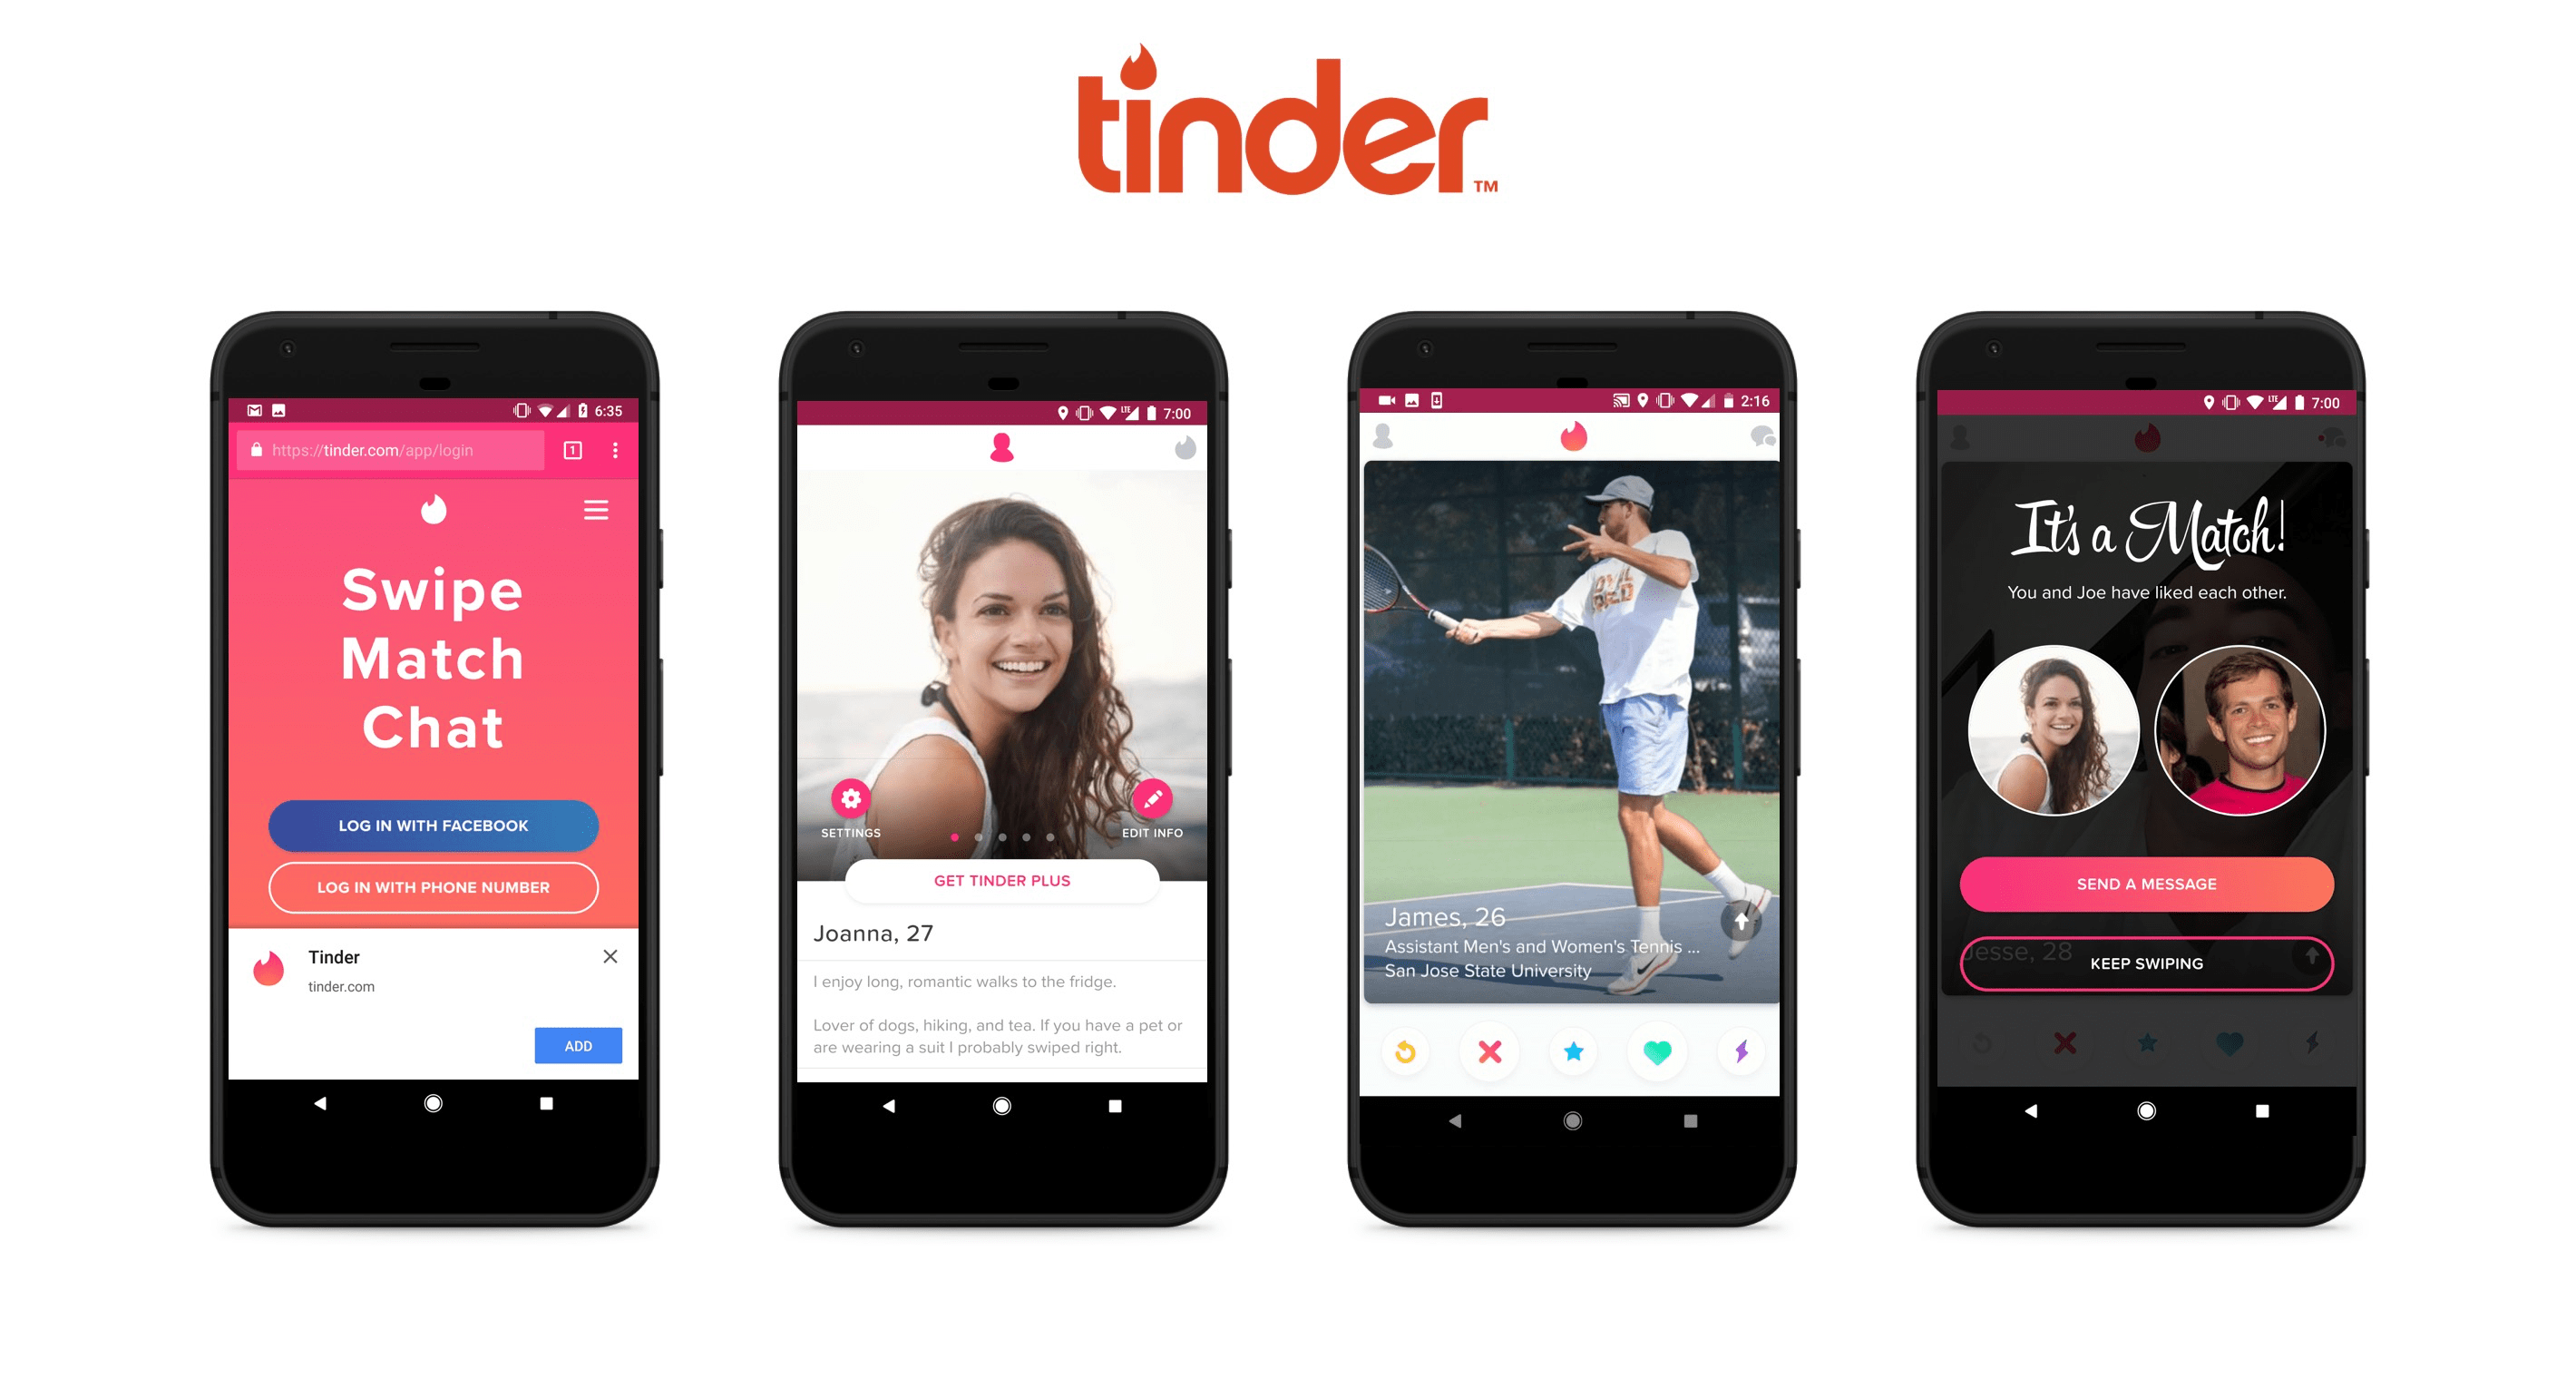 Tinder’s swipe feature is a minimum lovable product